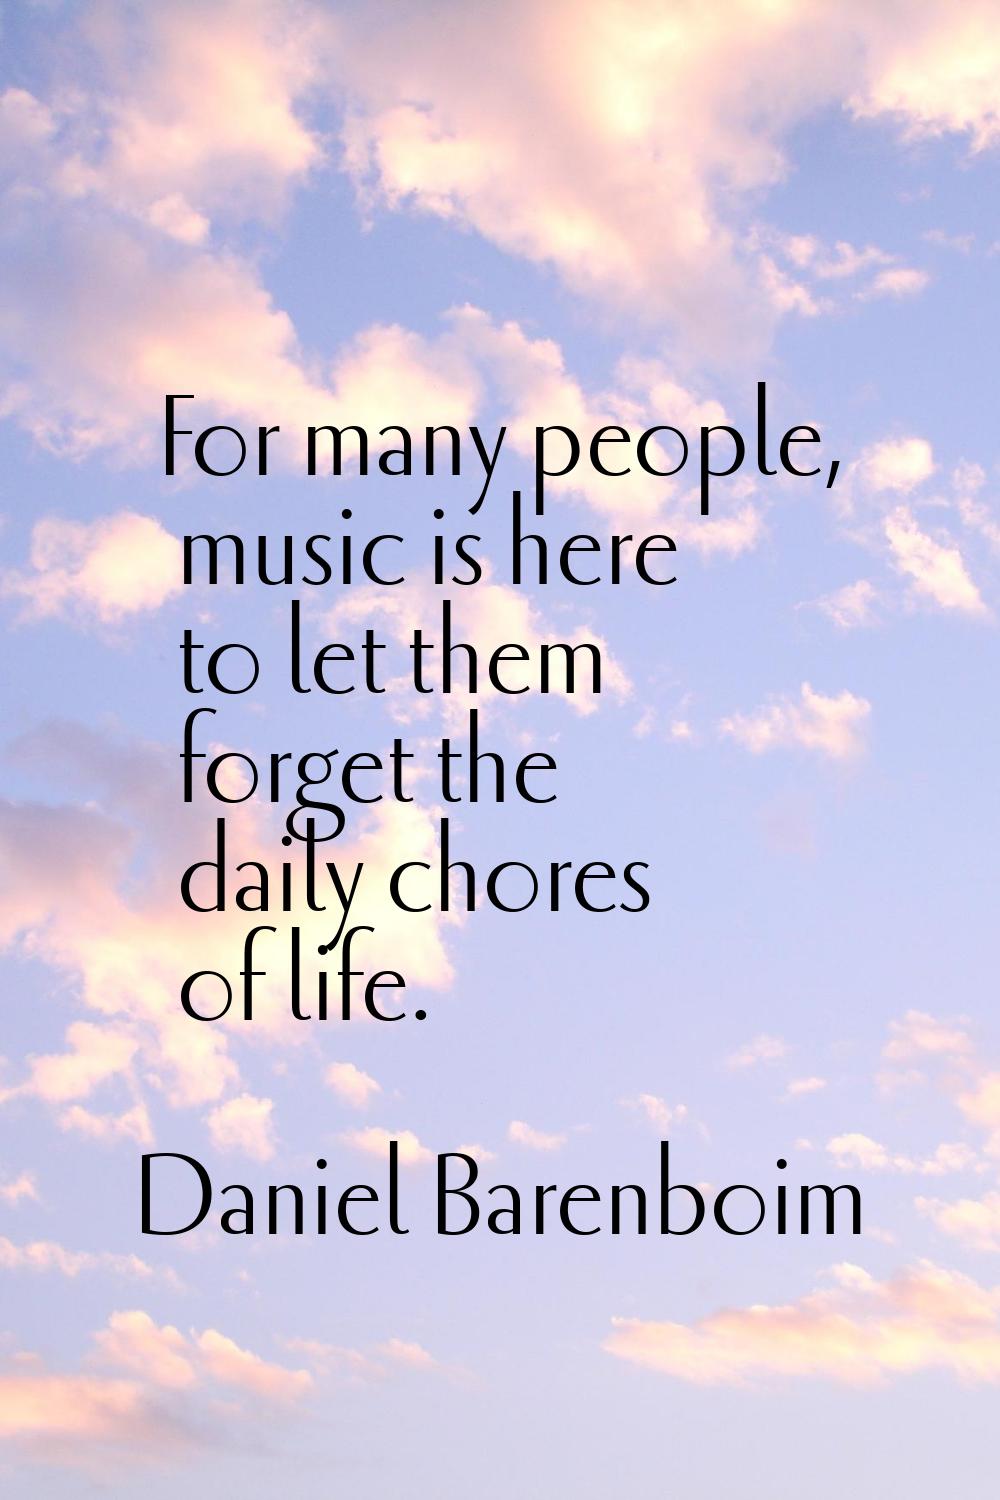 For many people, music is here to let them forget the daily chores of life.